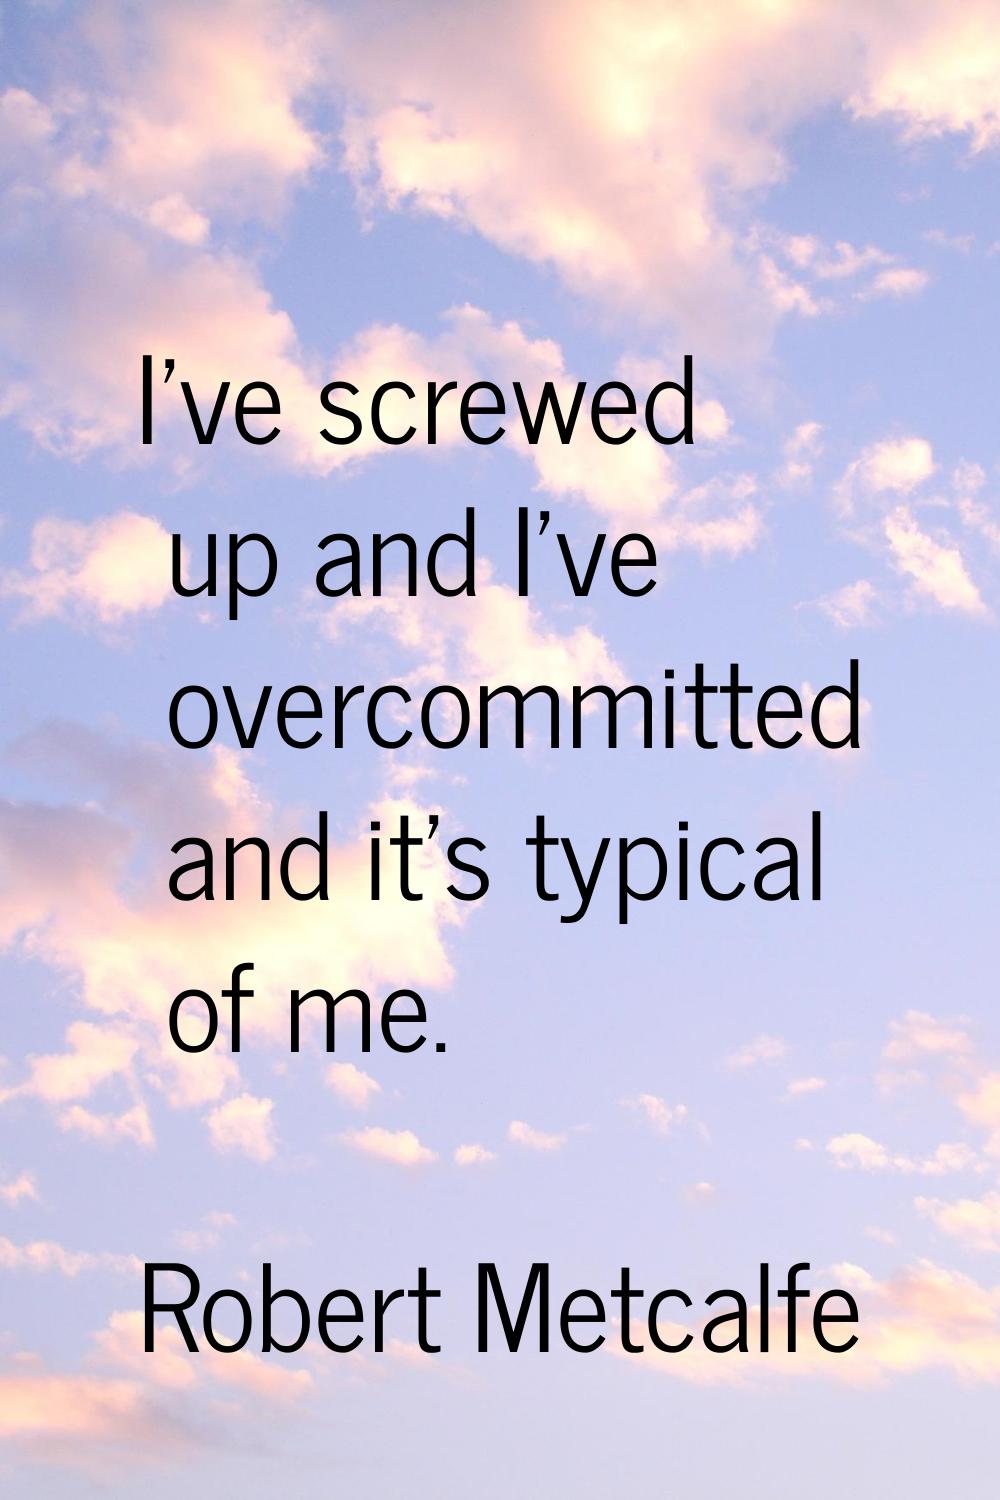 I've screwed up and I've overcommitted and it's typical of me.